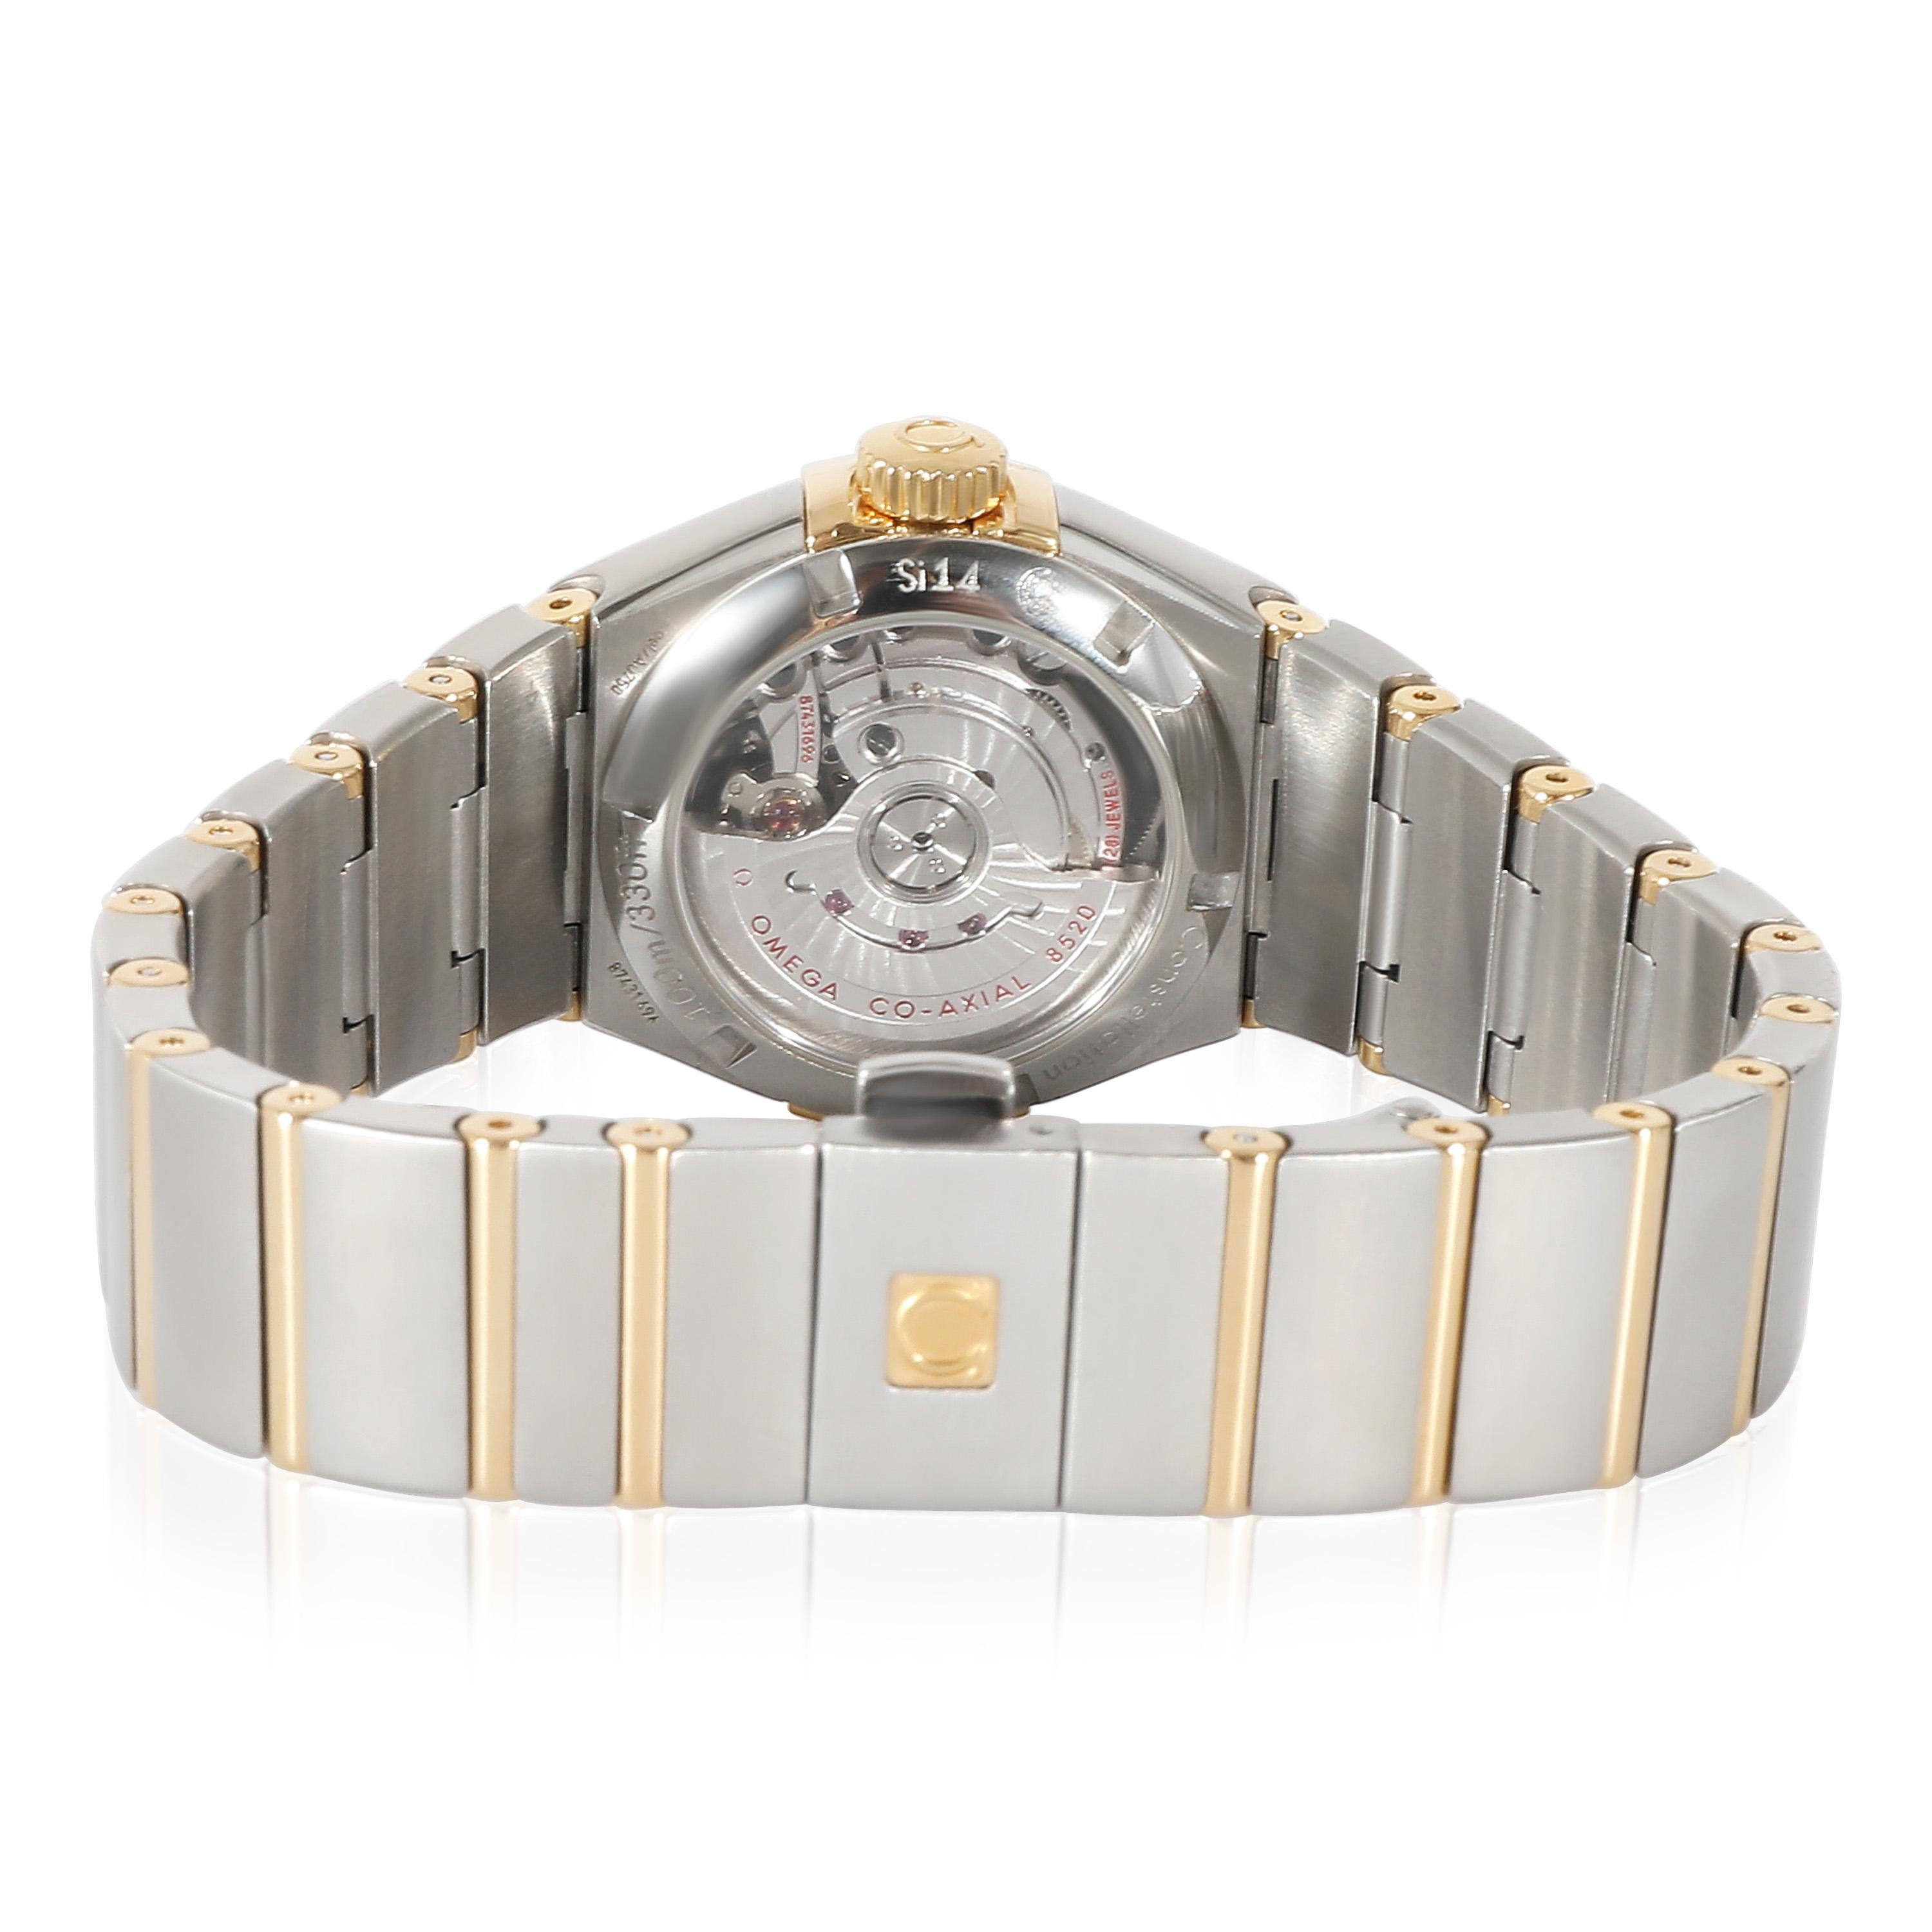 Omega Constellation 123.20.27.20.58.001 Women's Watch in 18k Stainless Steel/Yel

SKU: 132925

PRIMARY DETAILS
Brand: Omega
Model: Constellation
Country of Origin: Switzerland
Movement Type: Mechanical: Automatic/Kinetic
Year of Manufacture: